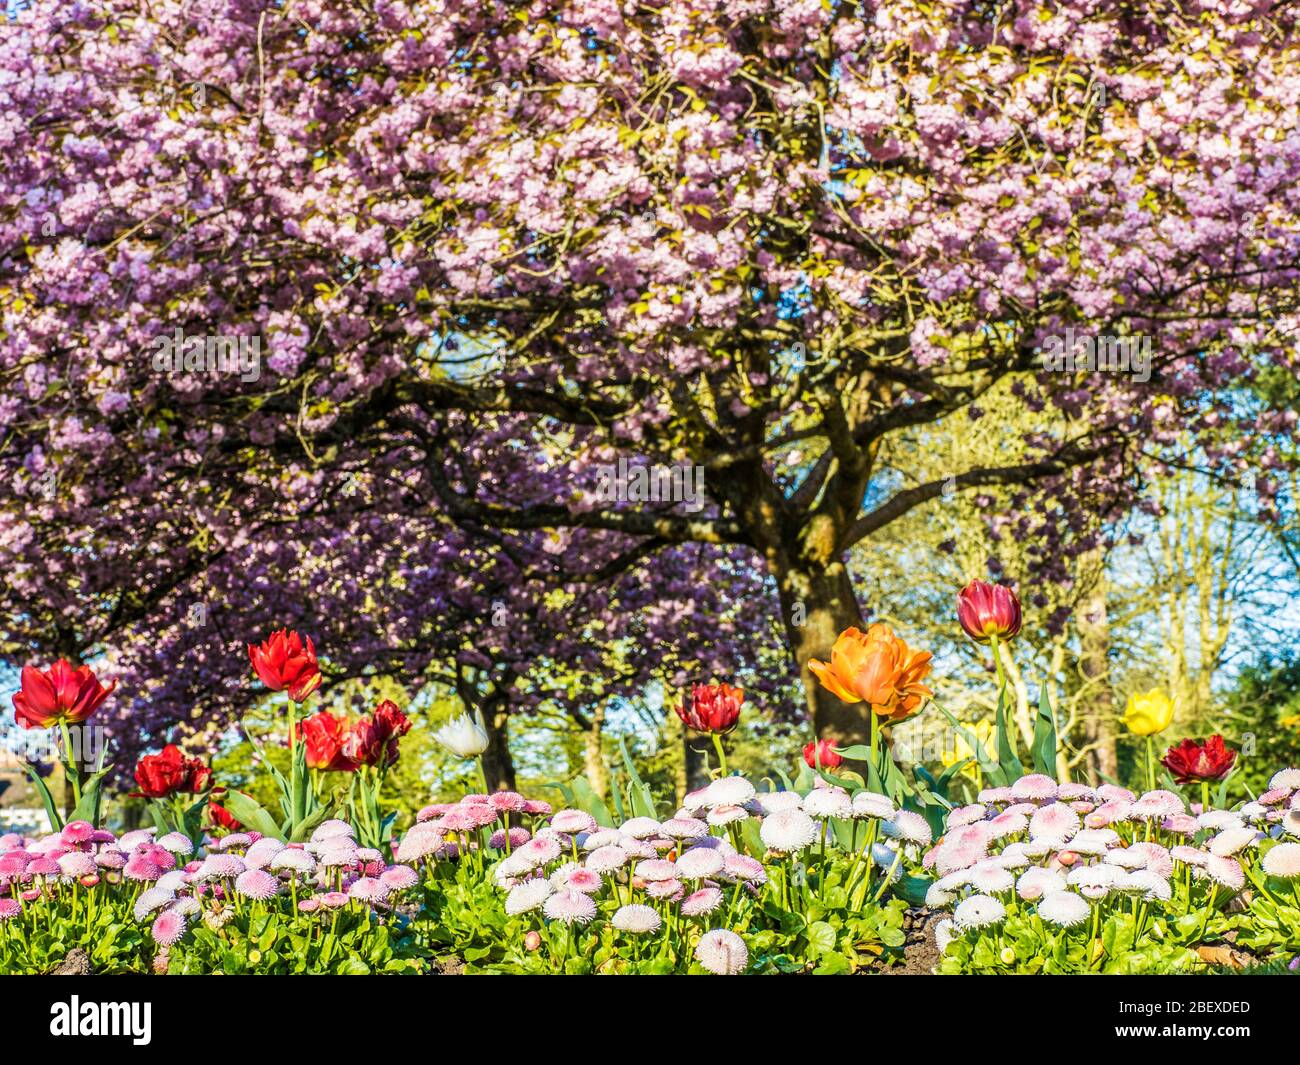 A bed of tulips and pink Bellis daisies with flowering pink cherry trees in the background in an urban public park in England. Stock Photo